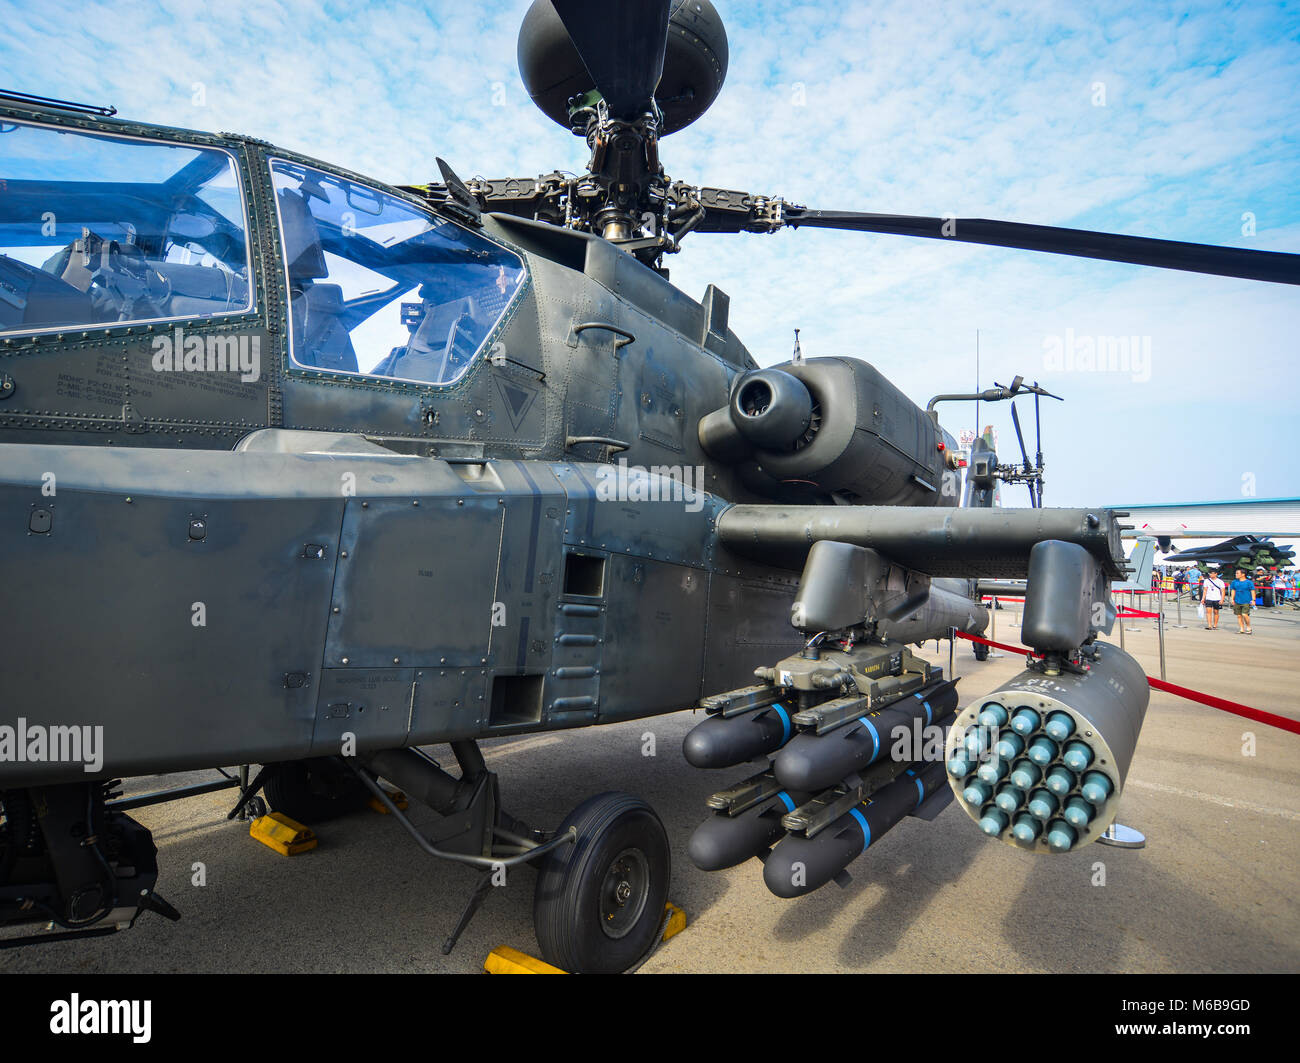 Singapore  - Feb 10, 2018. Weapons of Boeing AH-64 Apache helicopter belong to the Singapore Air Force on display at the 2018 Singapore Airshow. Stock Photo